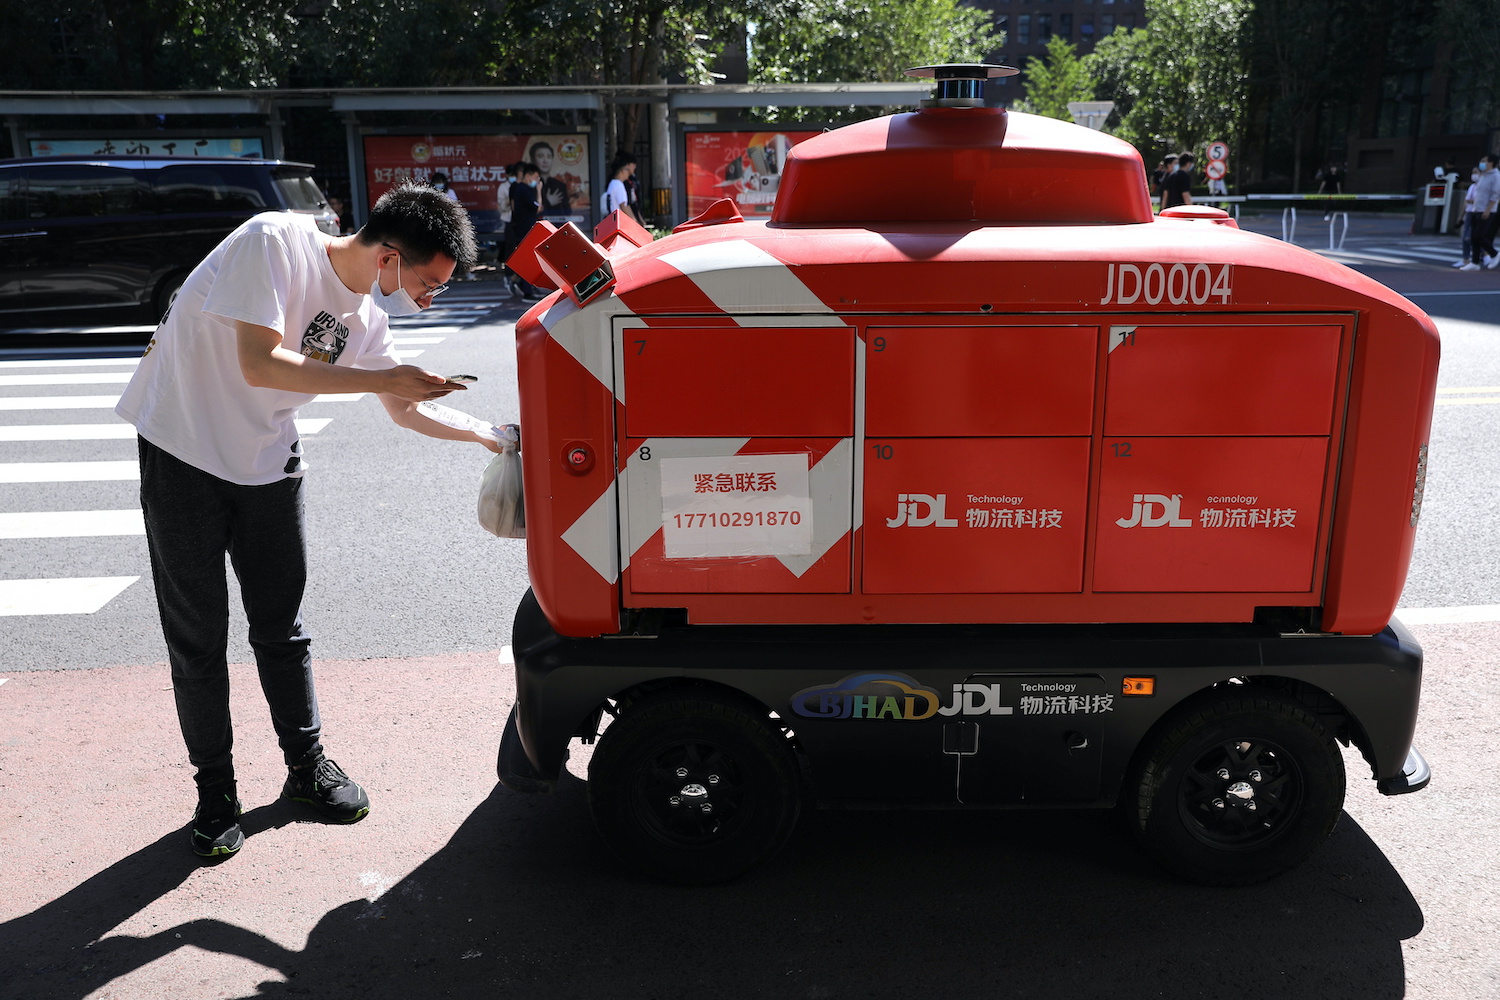 Alibaba, Meituan and JD.com Aim To Deliver With Aid Of A Robot Army